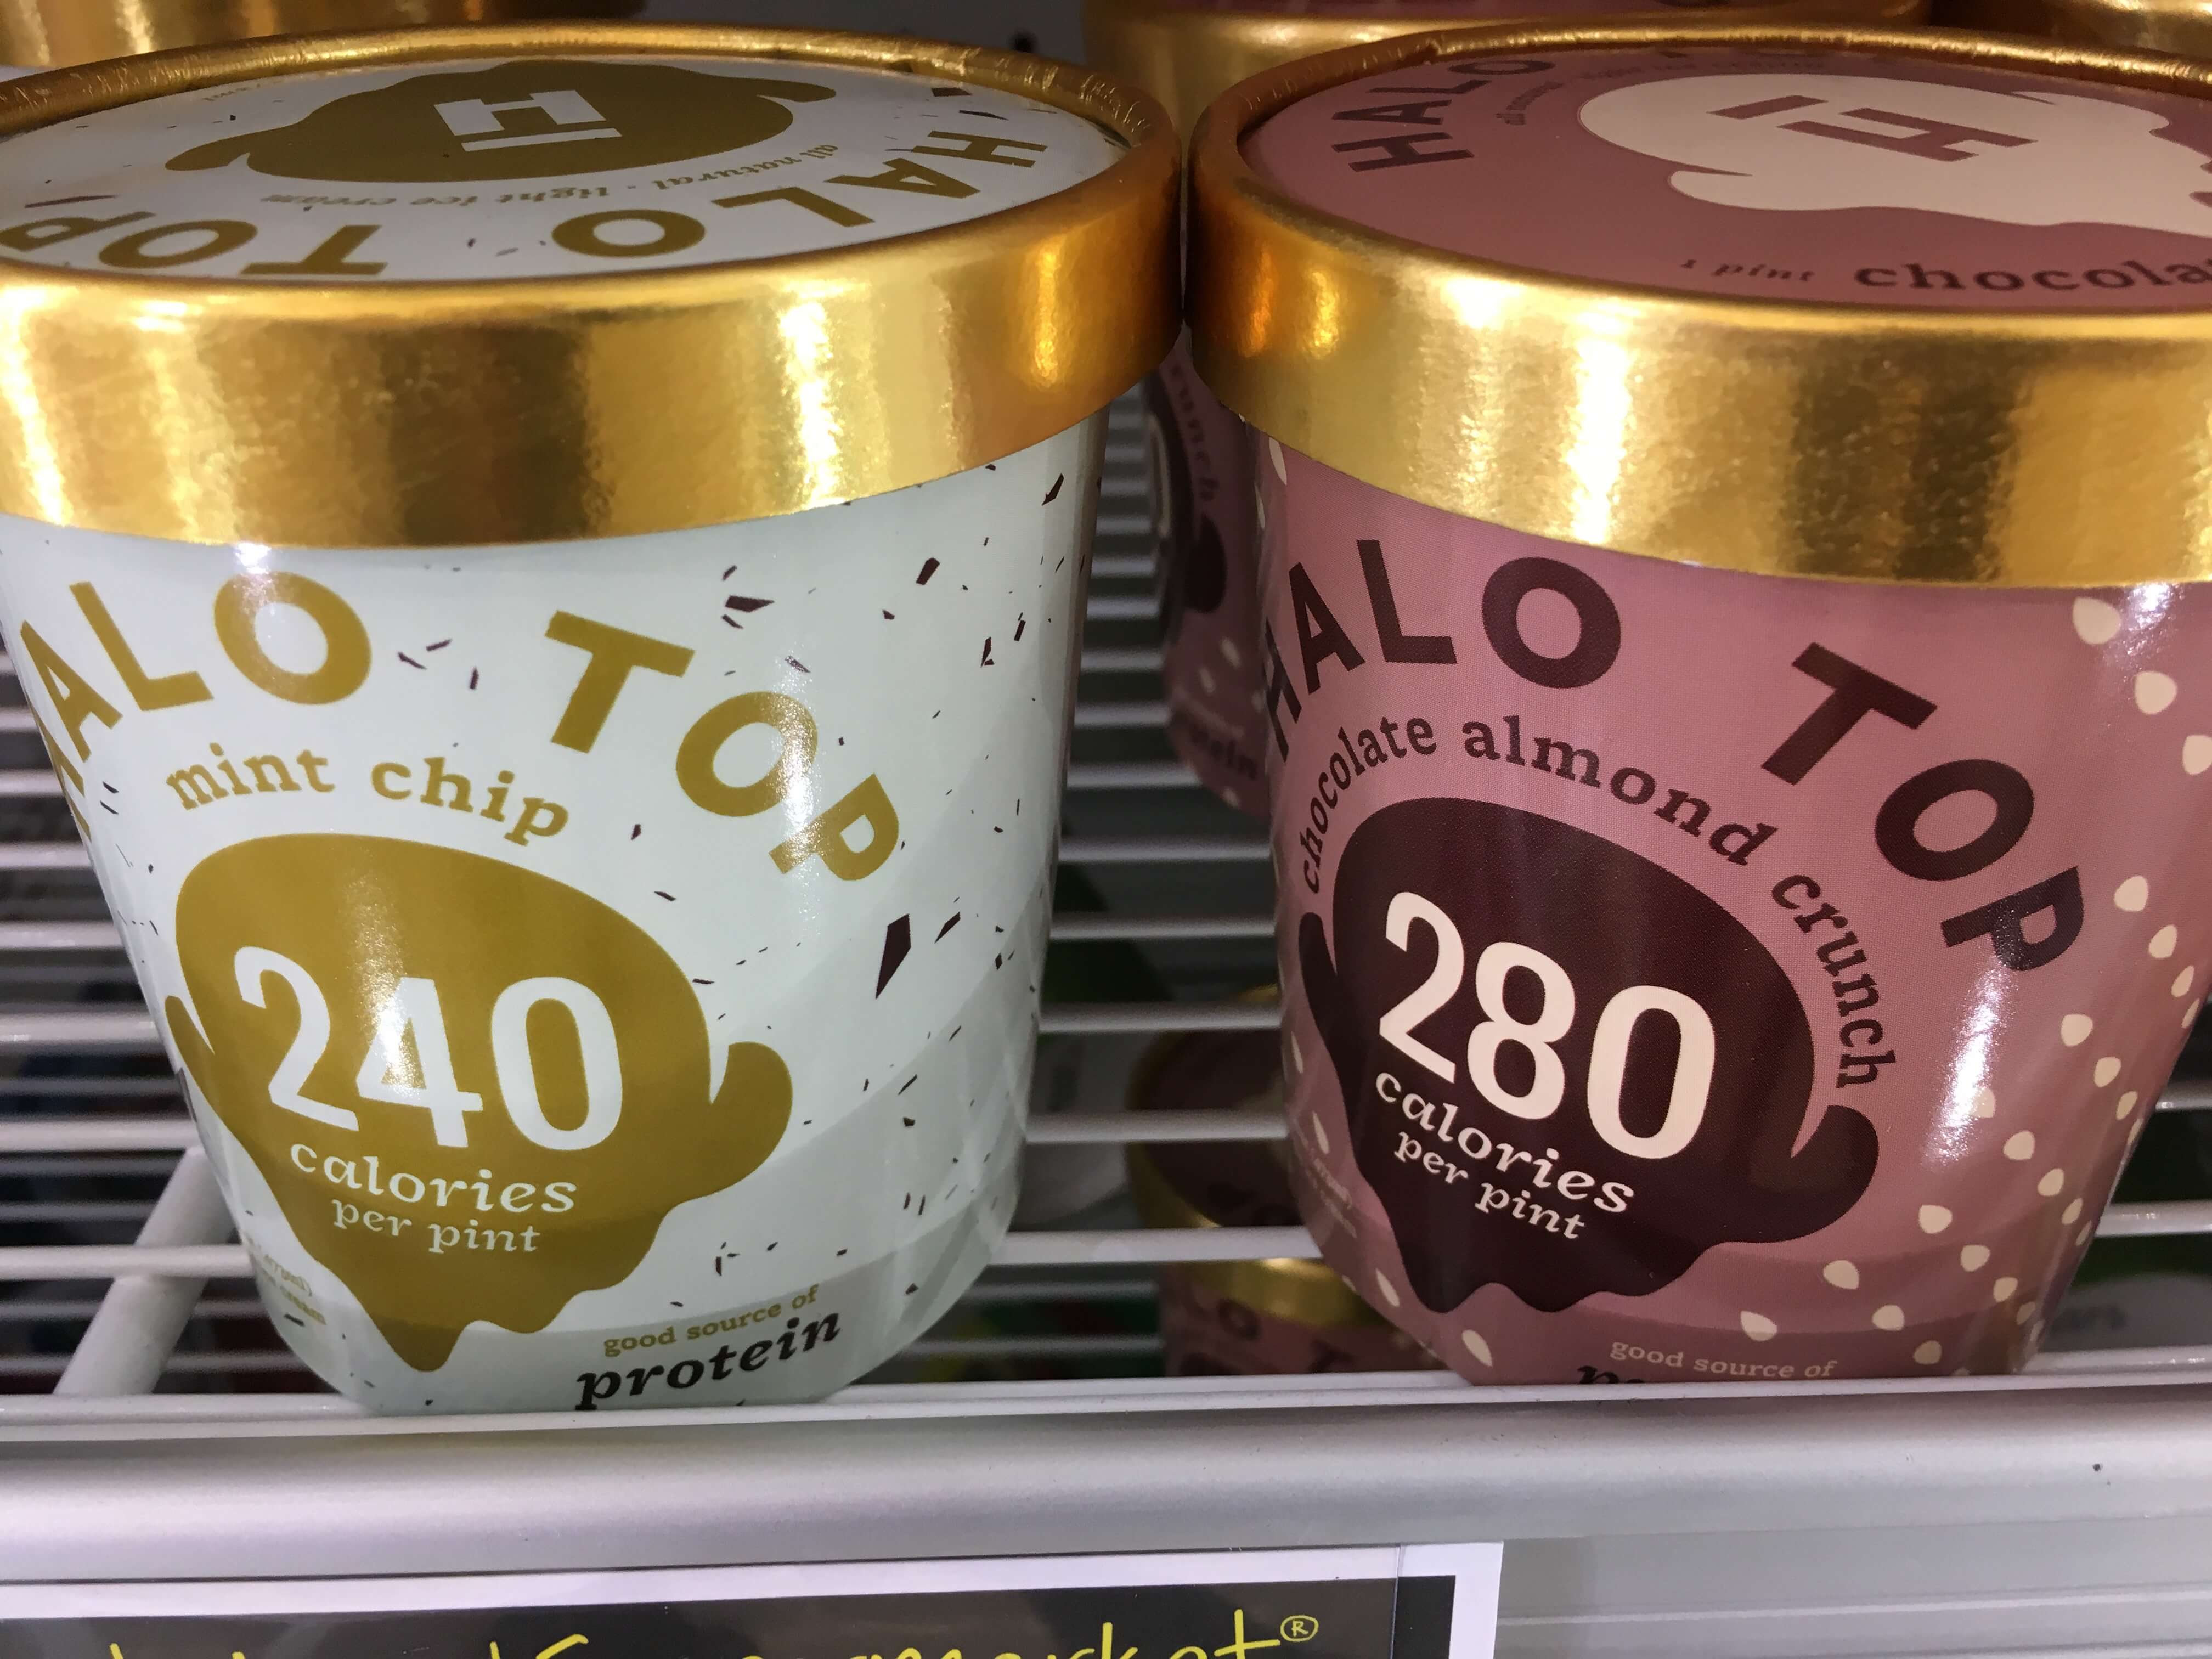 Halo Top Ice Cream as Low as $2.99 at Stop & Shop, Giant and Martin! | Living Rich With CouponsÂ®